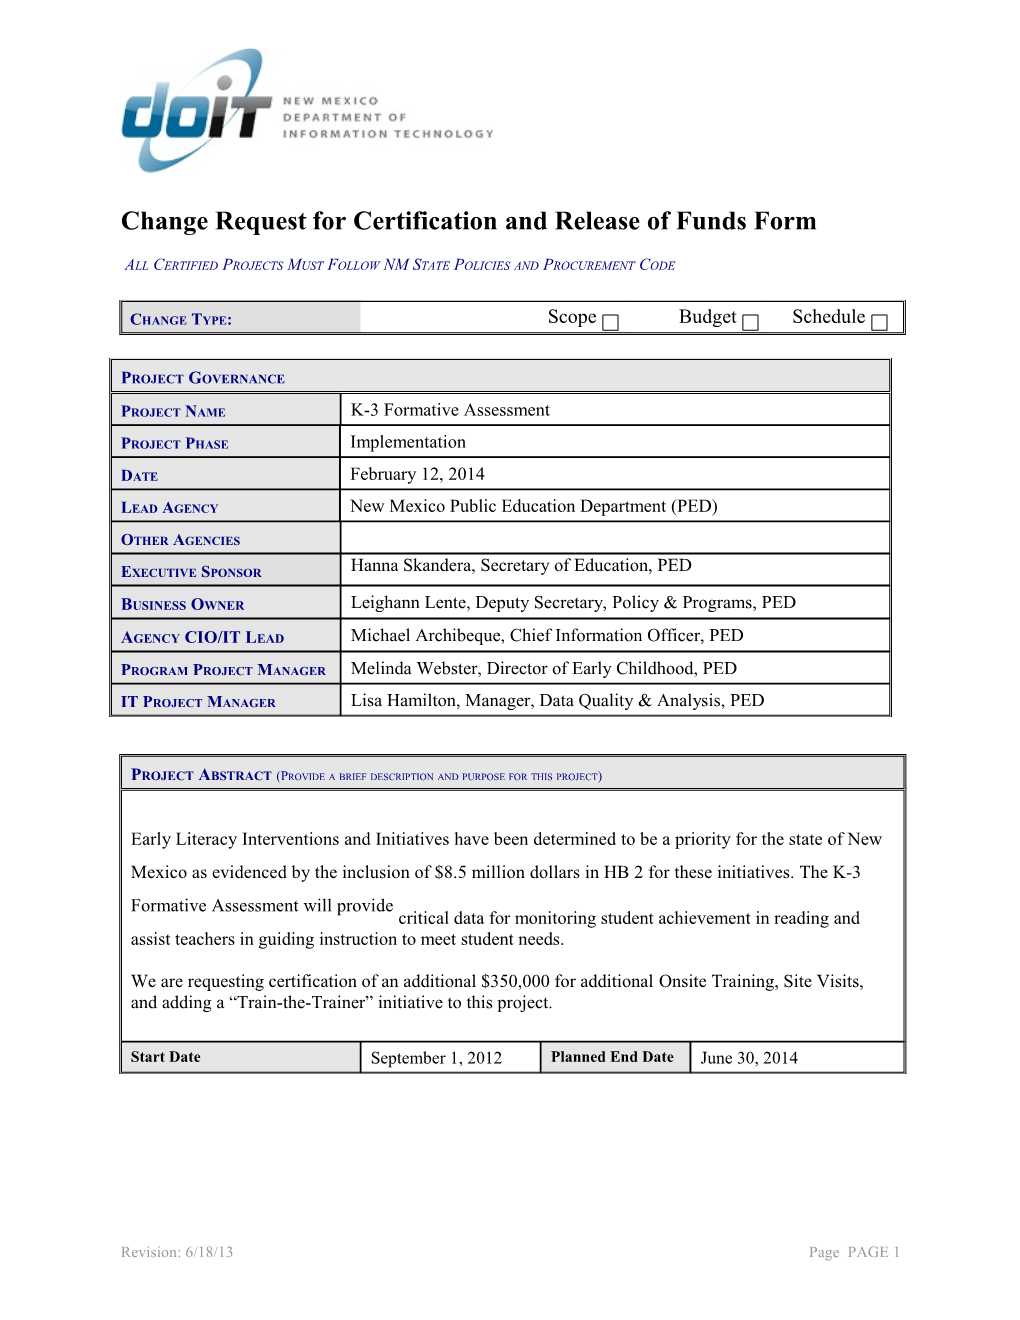 Change Request for Certification and Release of Funds Form